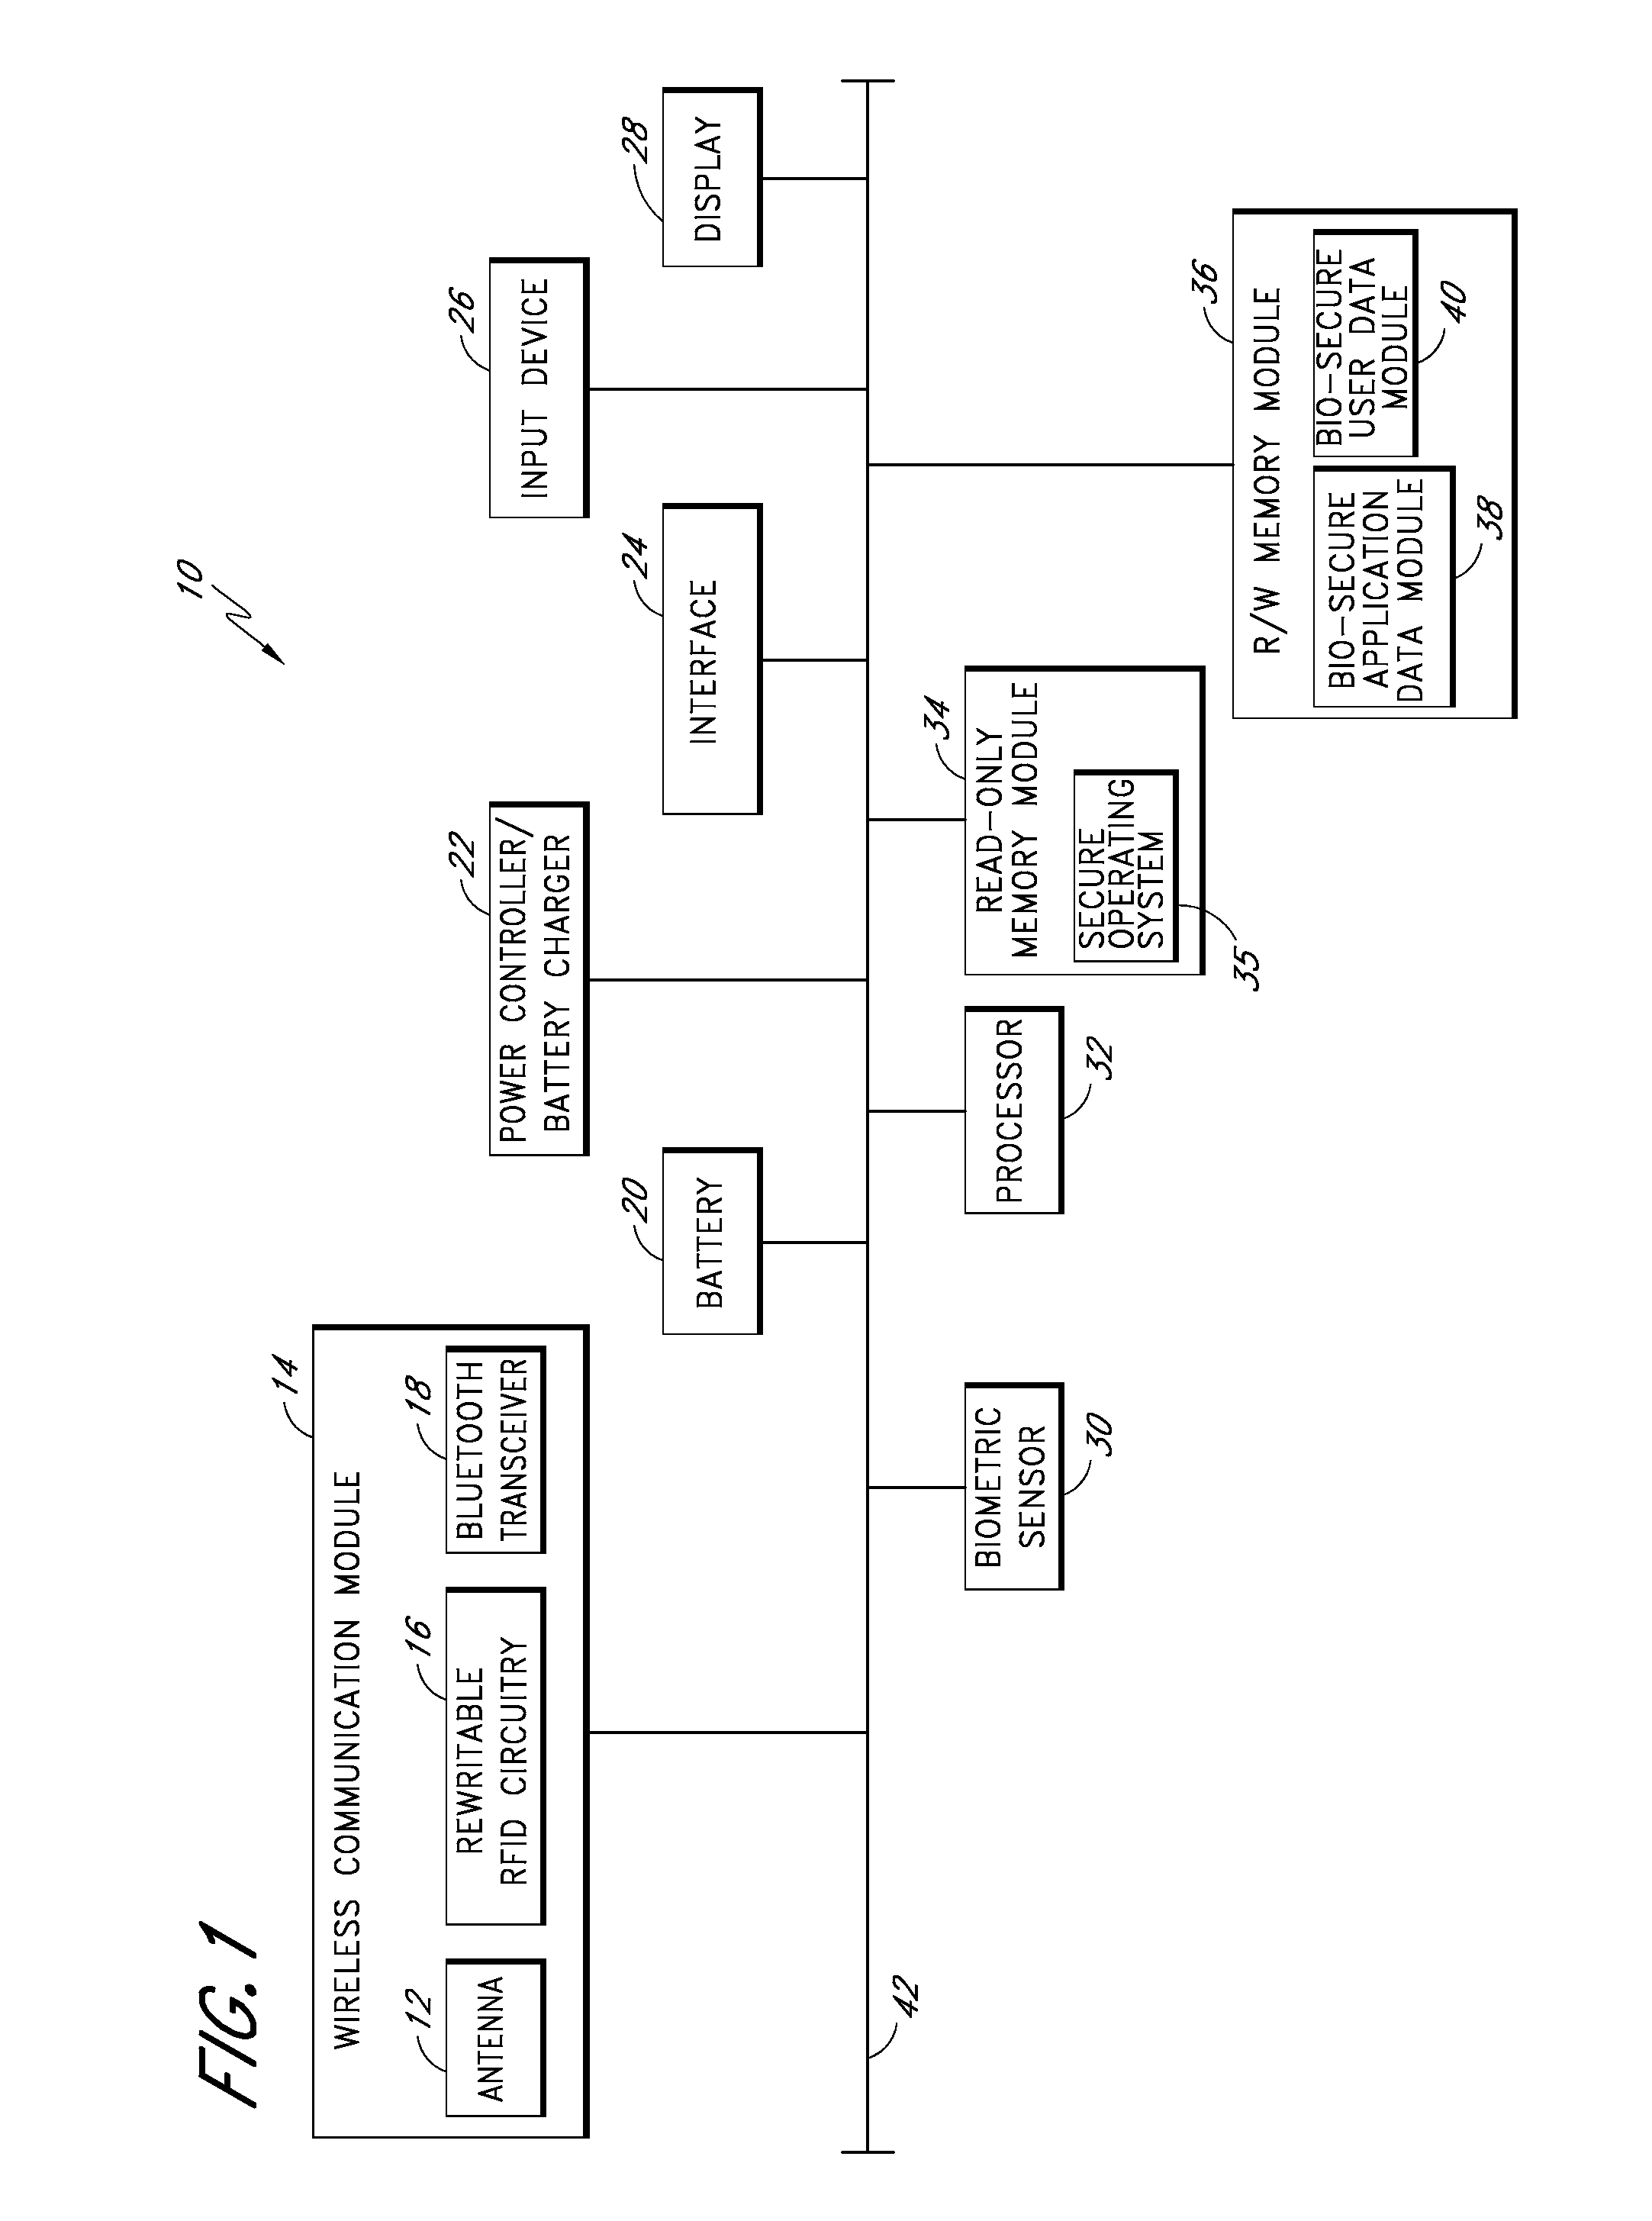 Systems and methods for establishing a secure computing environment for performing online transactions